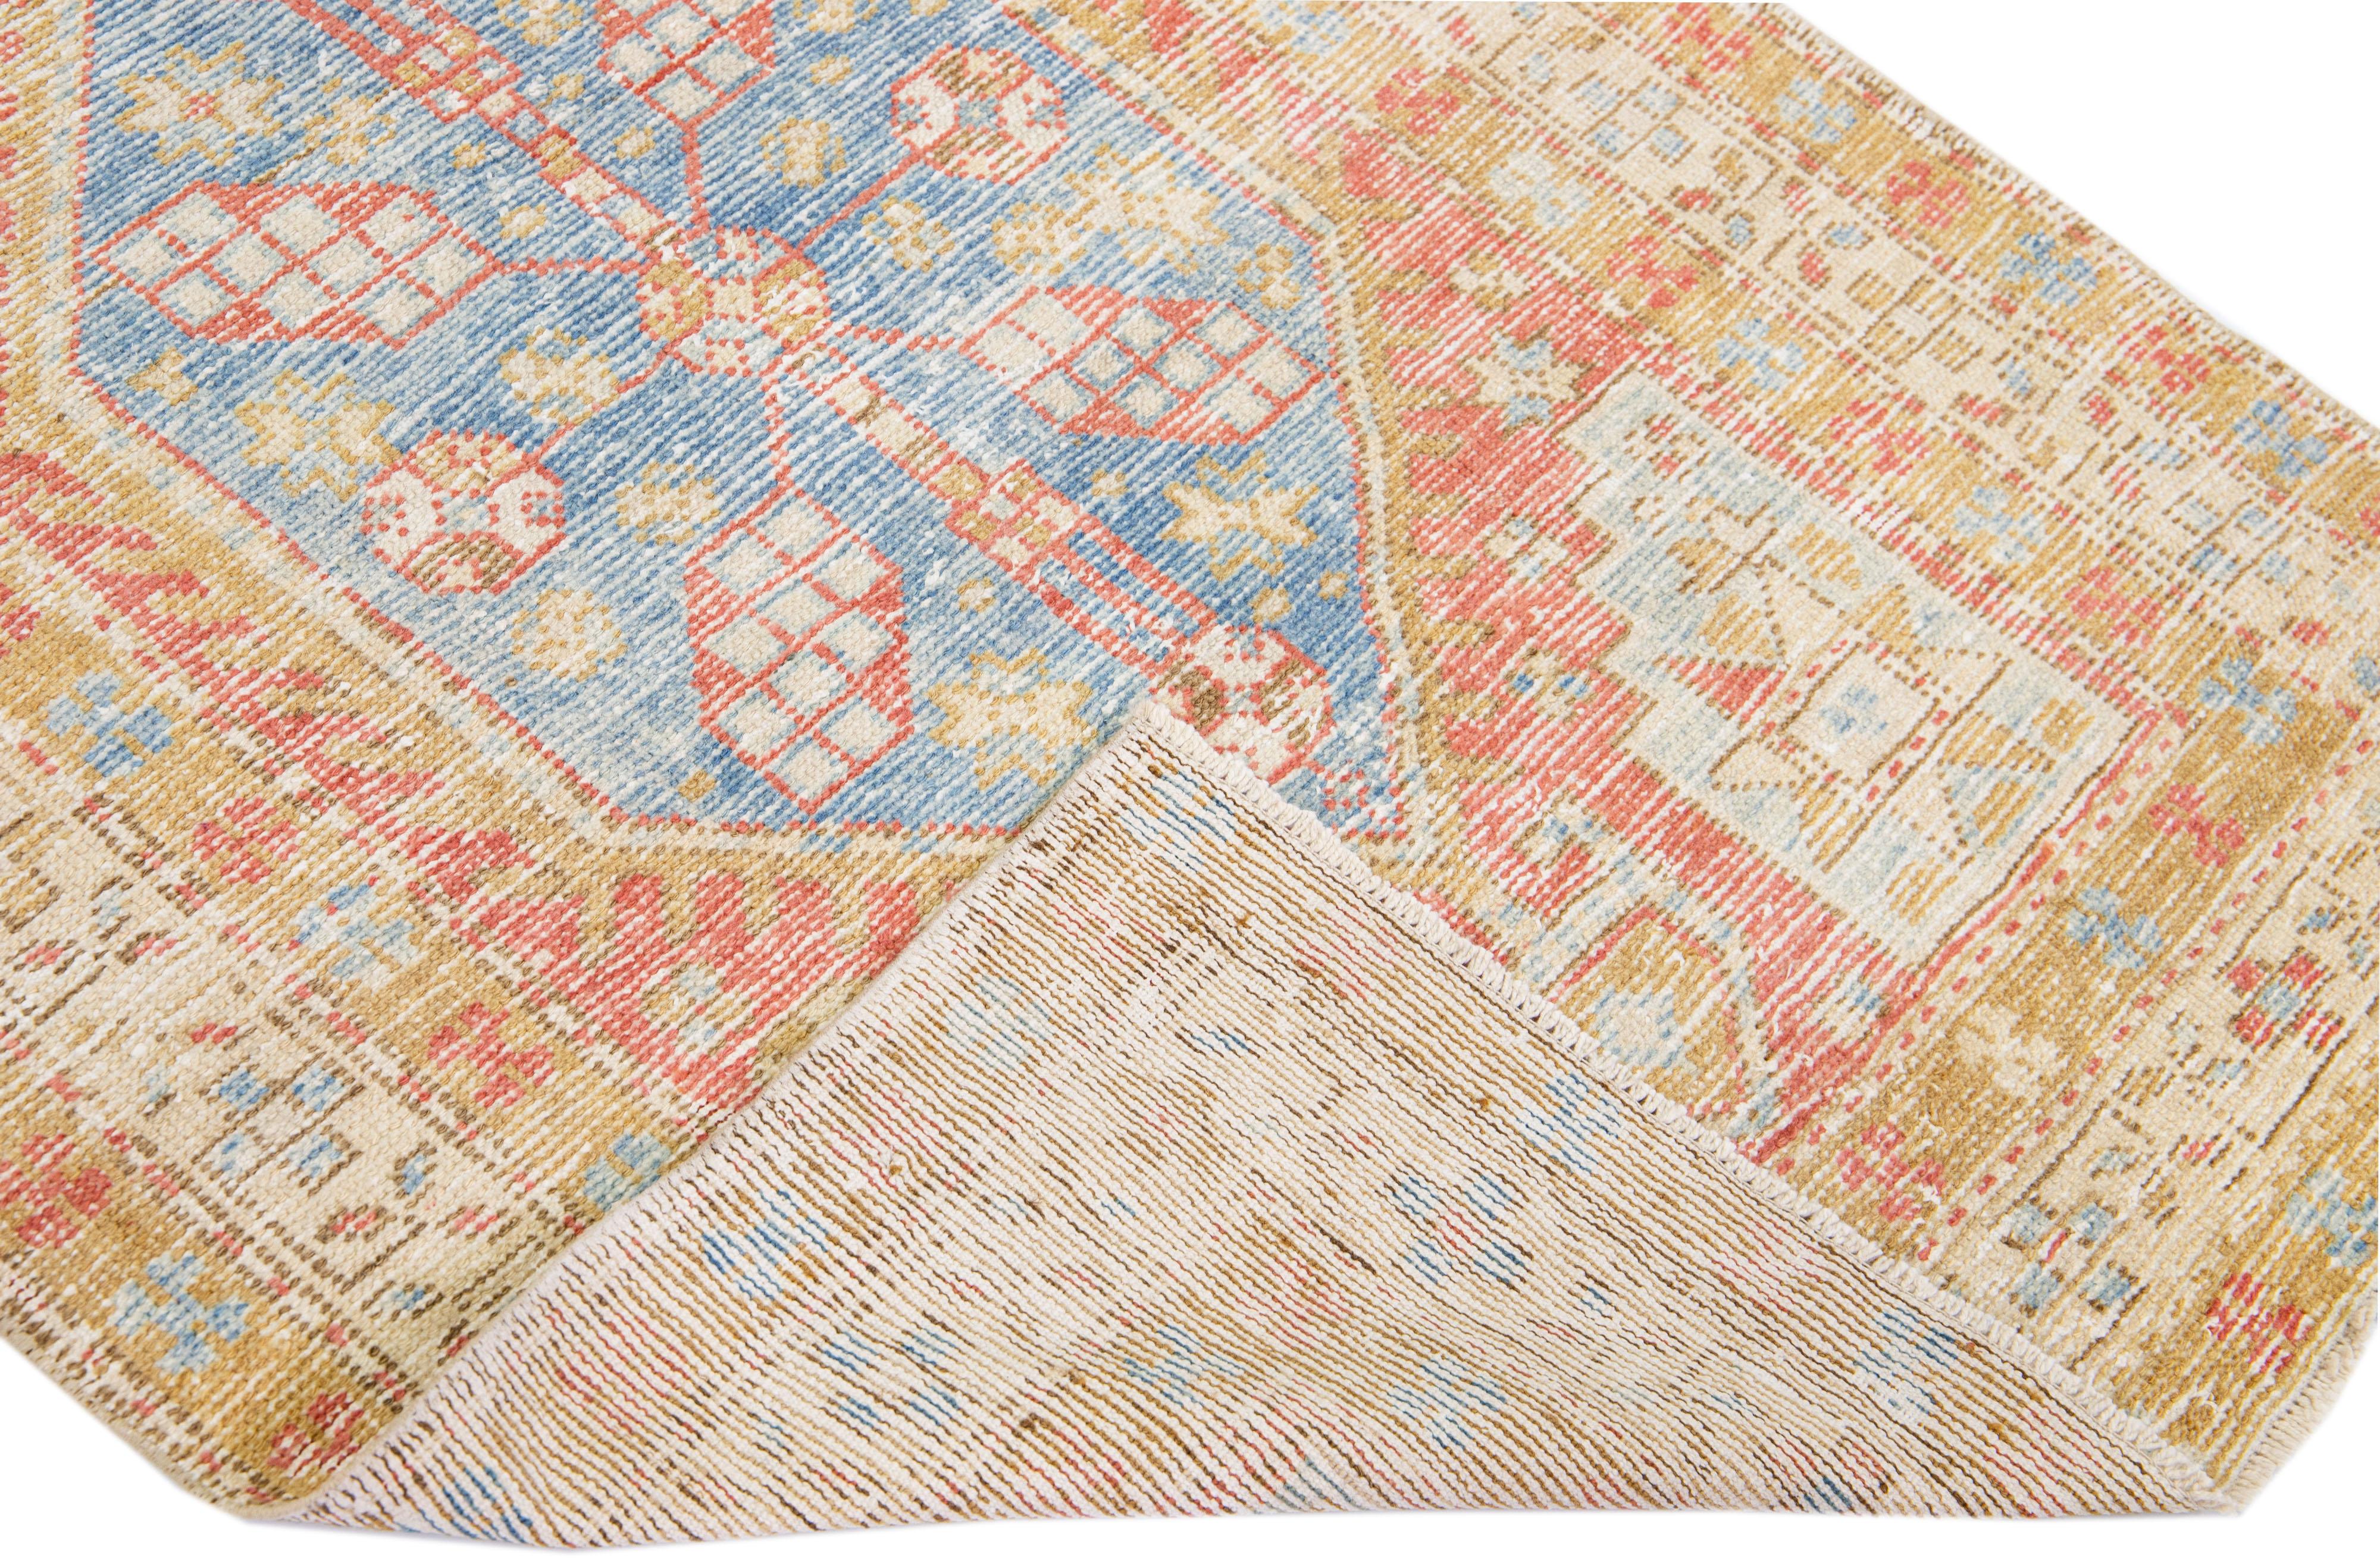 Beautiful antique Heriz hand-knotted wool runner with a red and blue field. This Persian rug has tan and beige accents in a gorgeous geometric medallion pattern.

This rug measures: 3'3